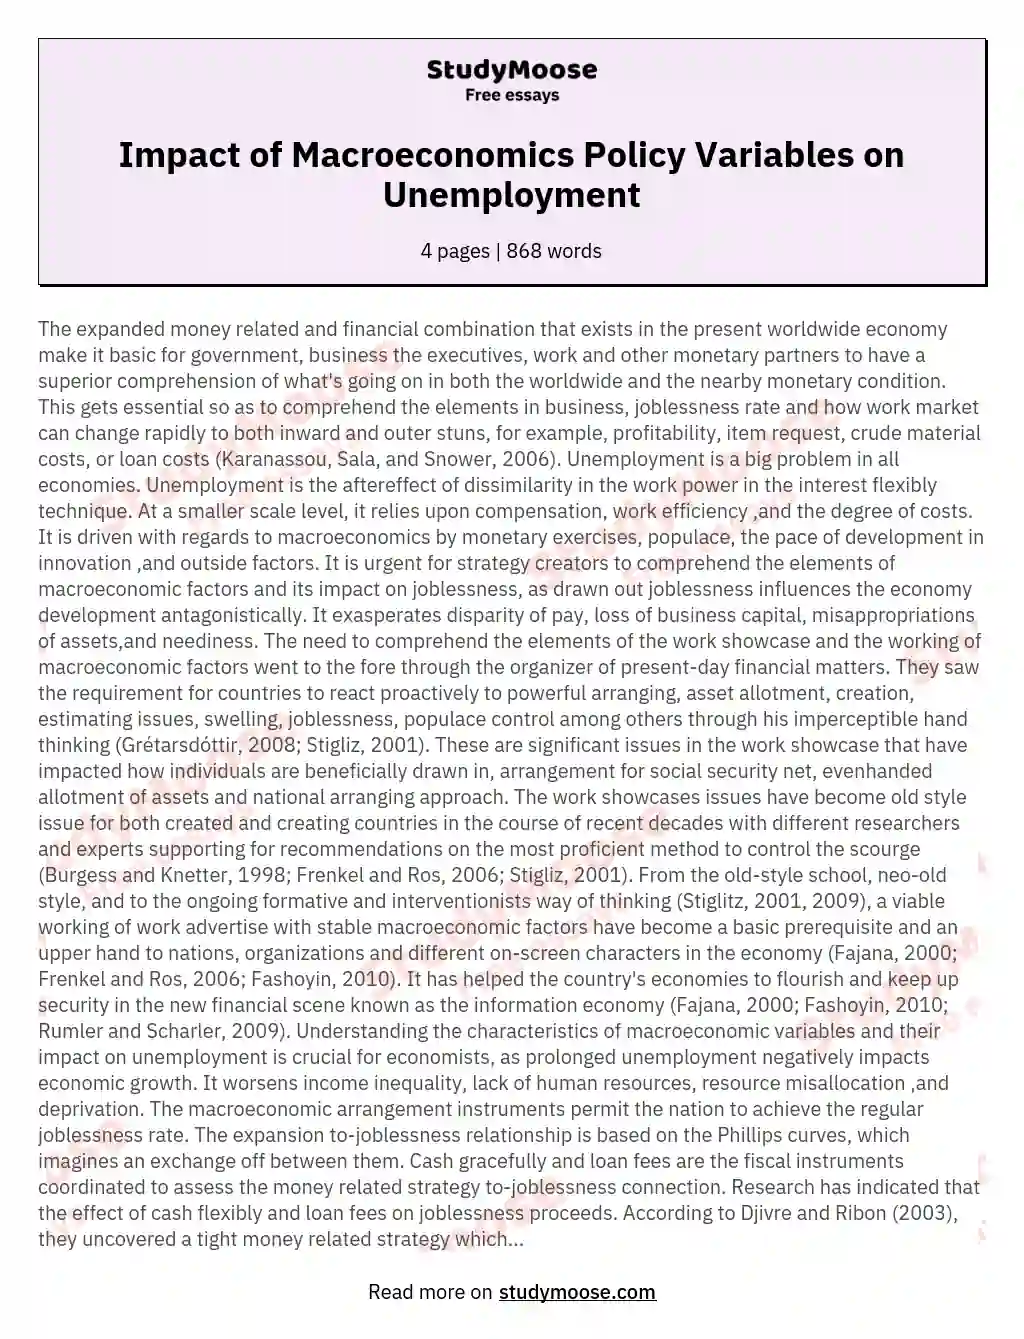 Impact of Macroeconomics Policy Variables on Unemployment essay